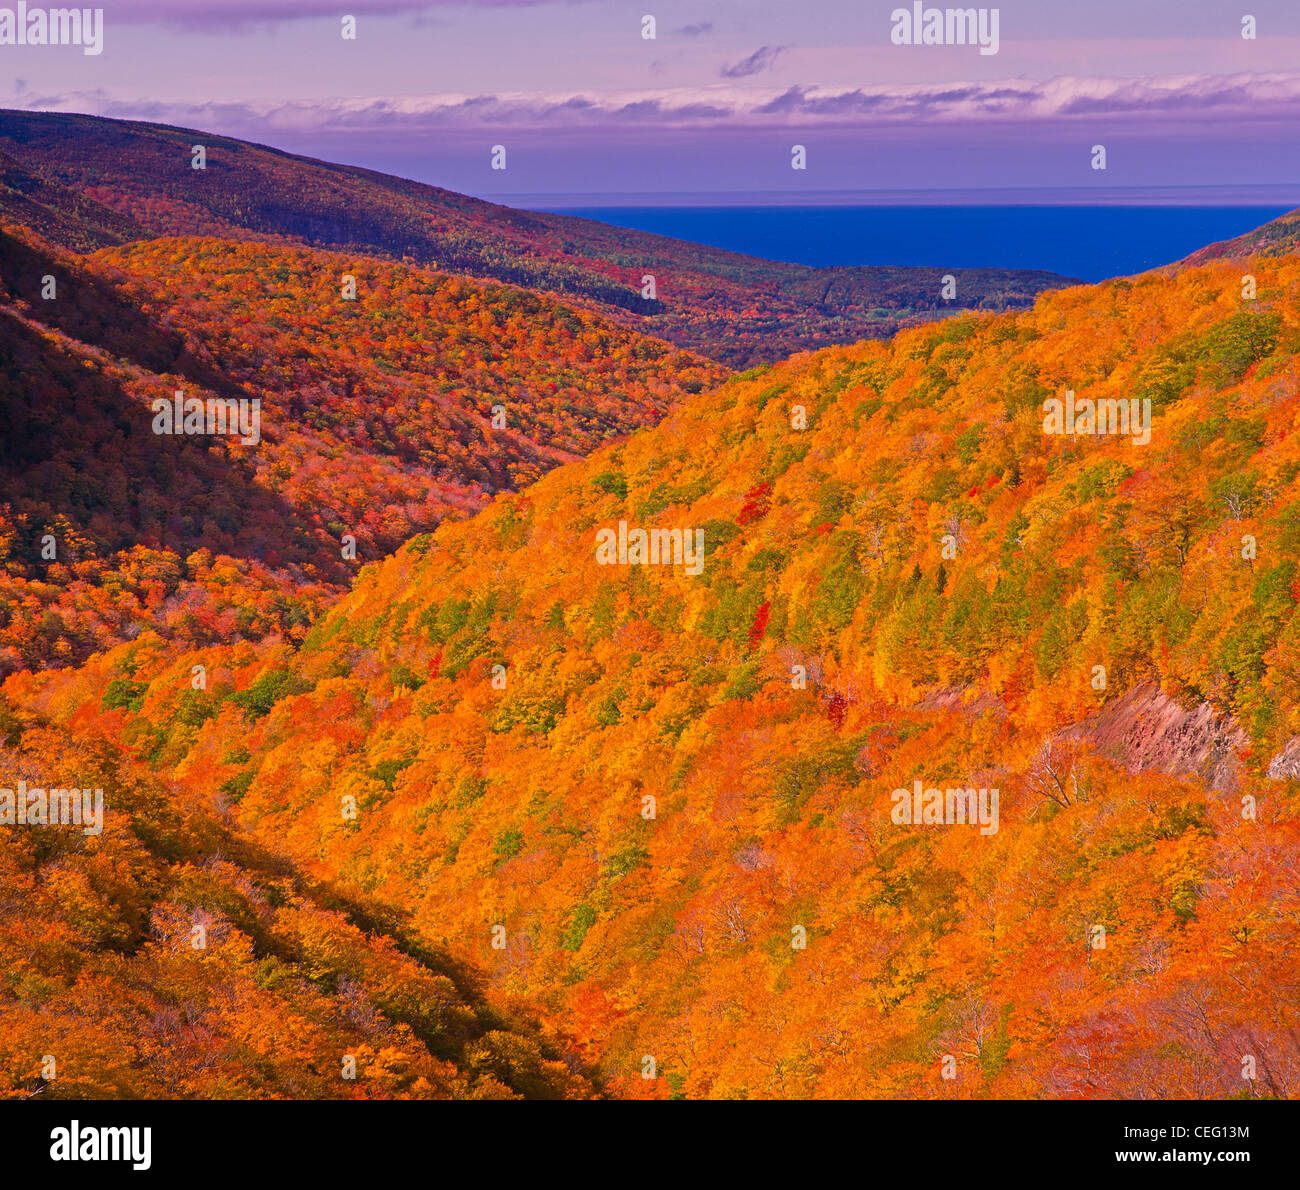 Fall At The Cabot Trail In Cape Breton Highlands National Park On Stock